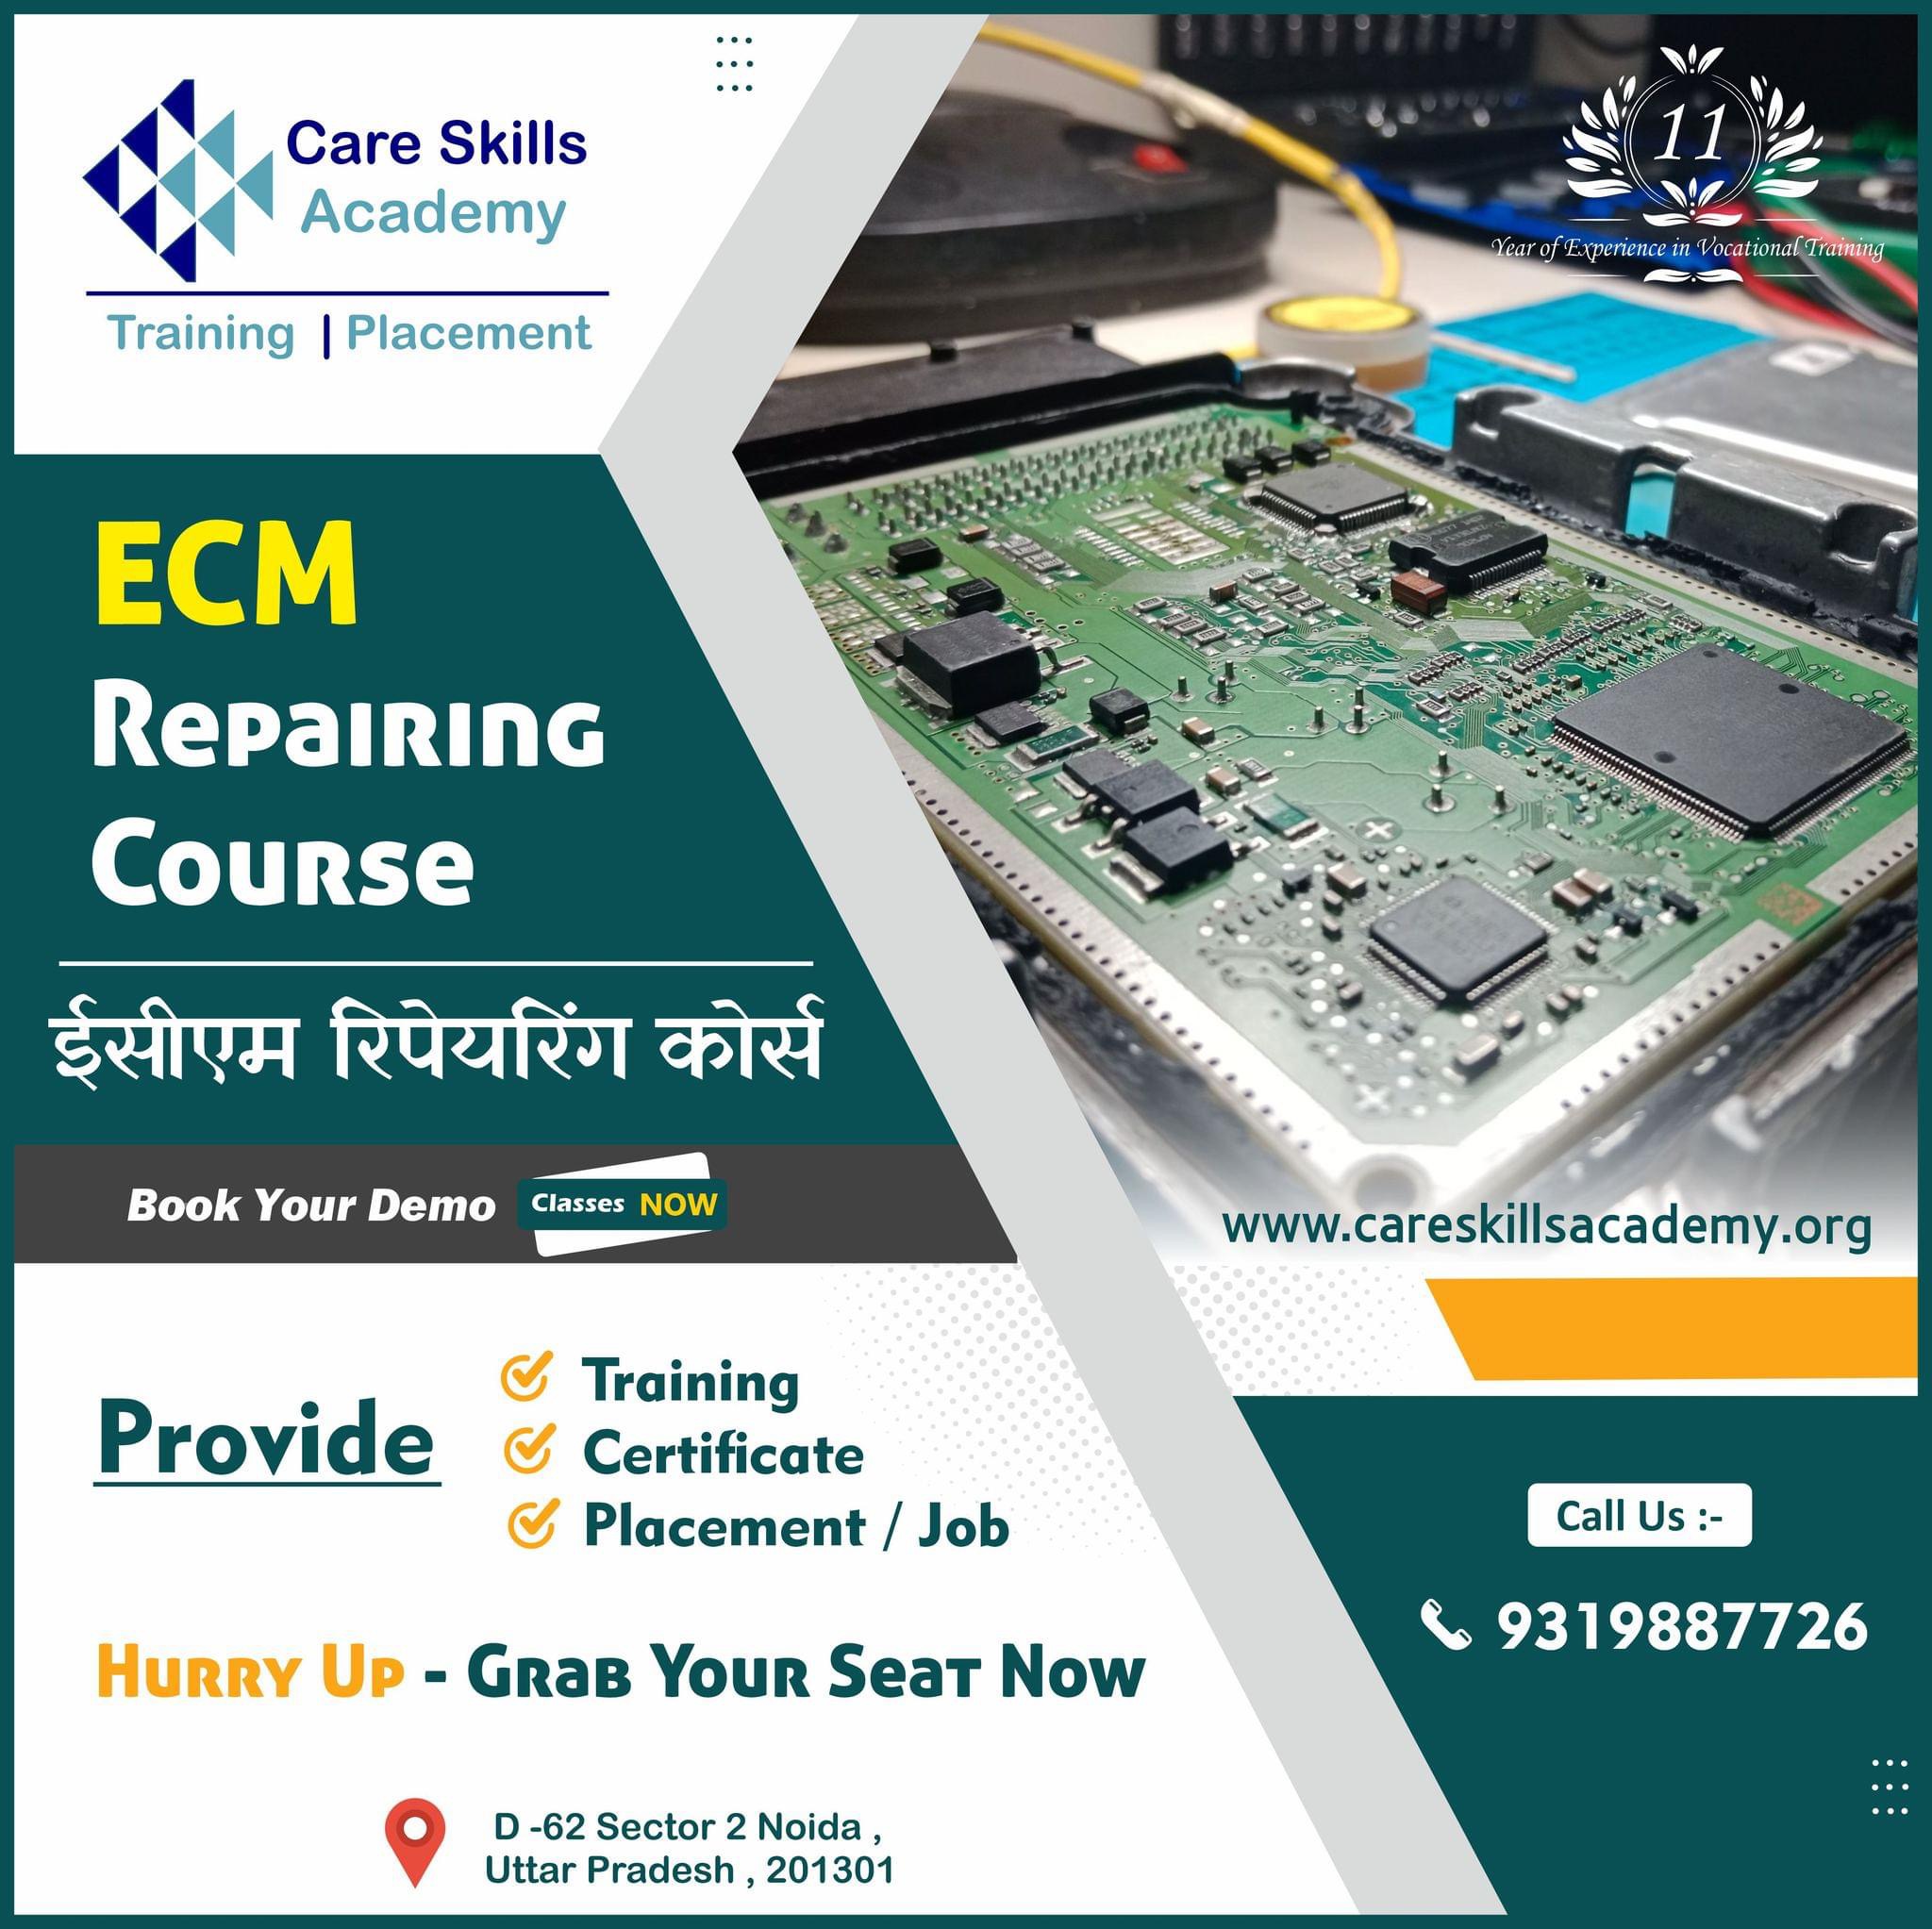 ECM Repairing Course by Care Skills Academy , Admission Open